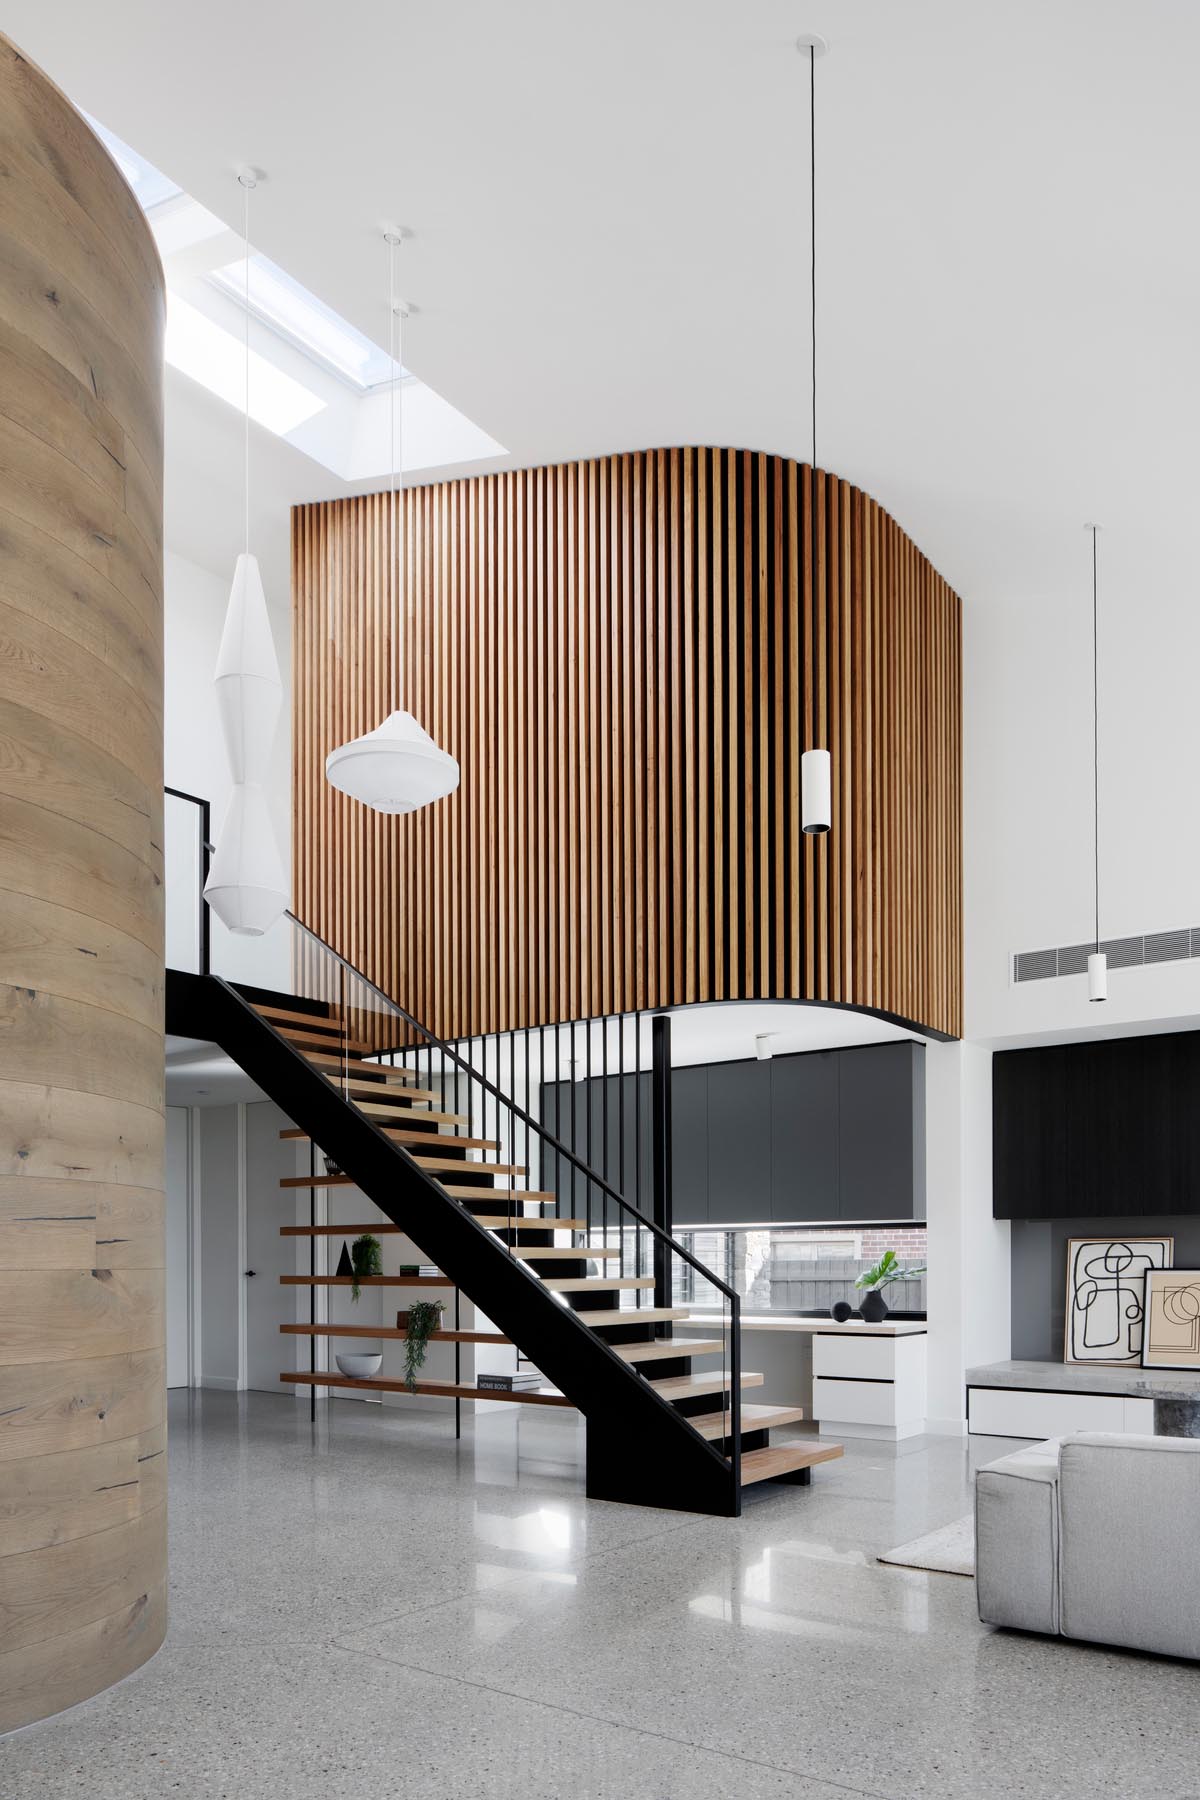 A modern interior with a curved timber wall and a second wood wall clad in timer battens.